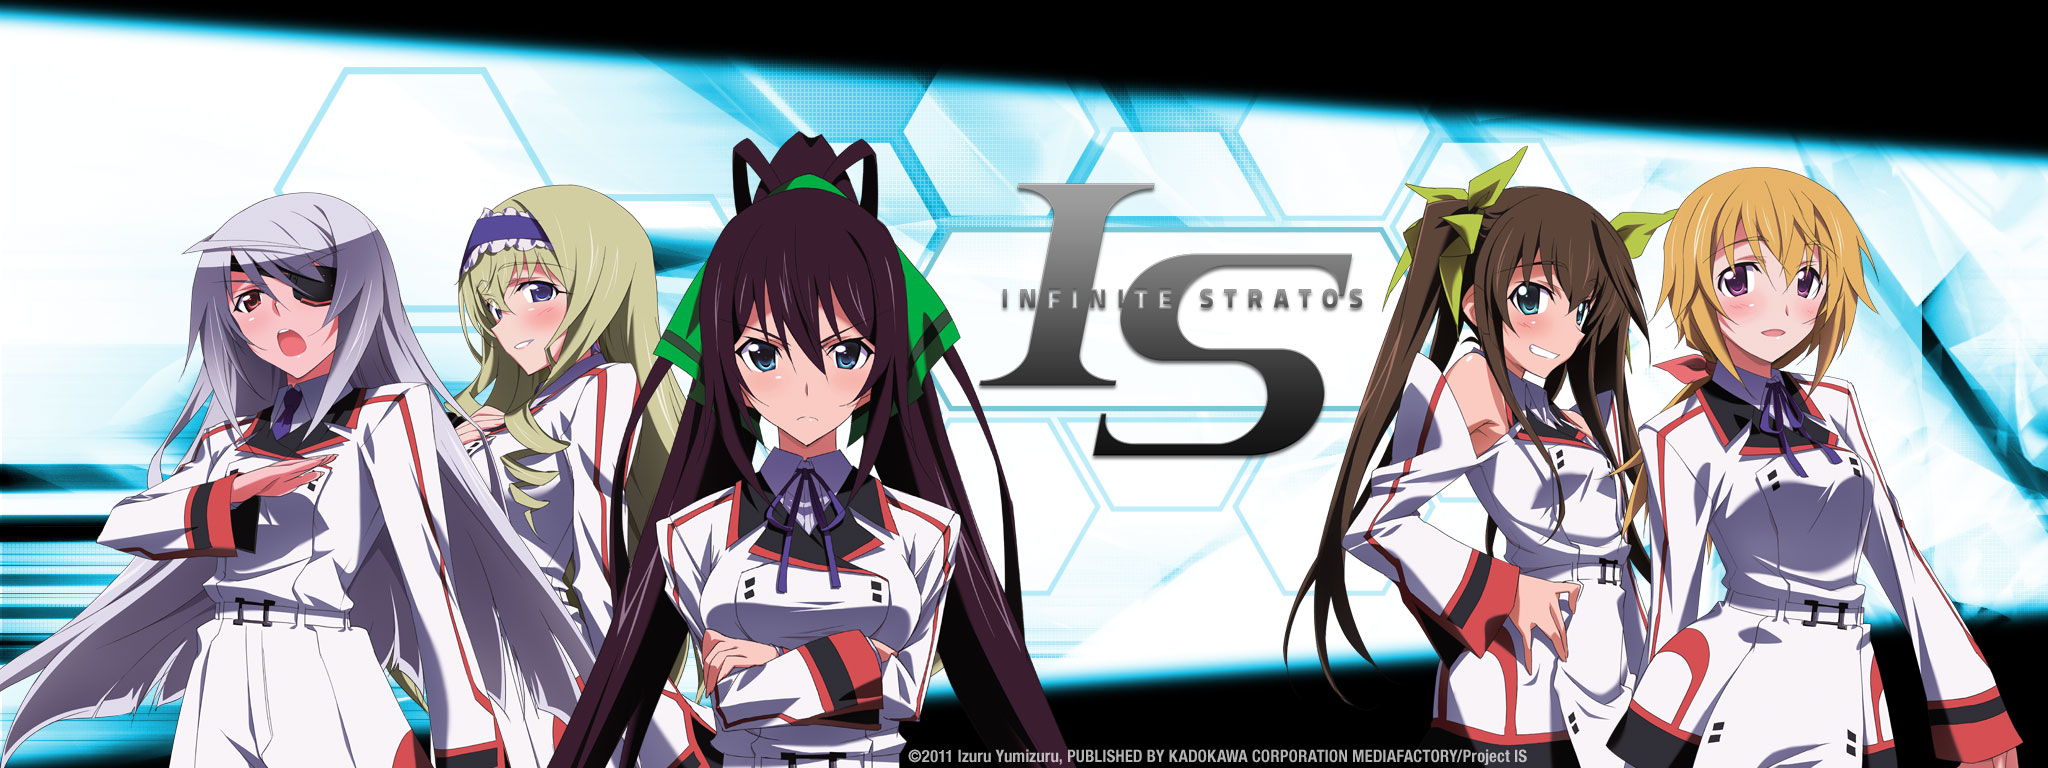 Title Art for Infinite Stratos